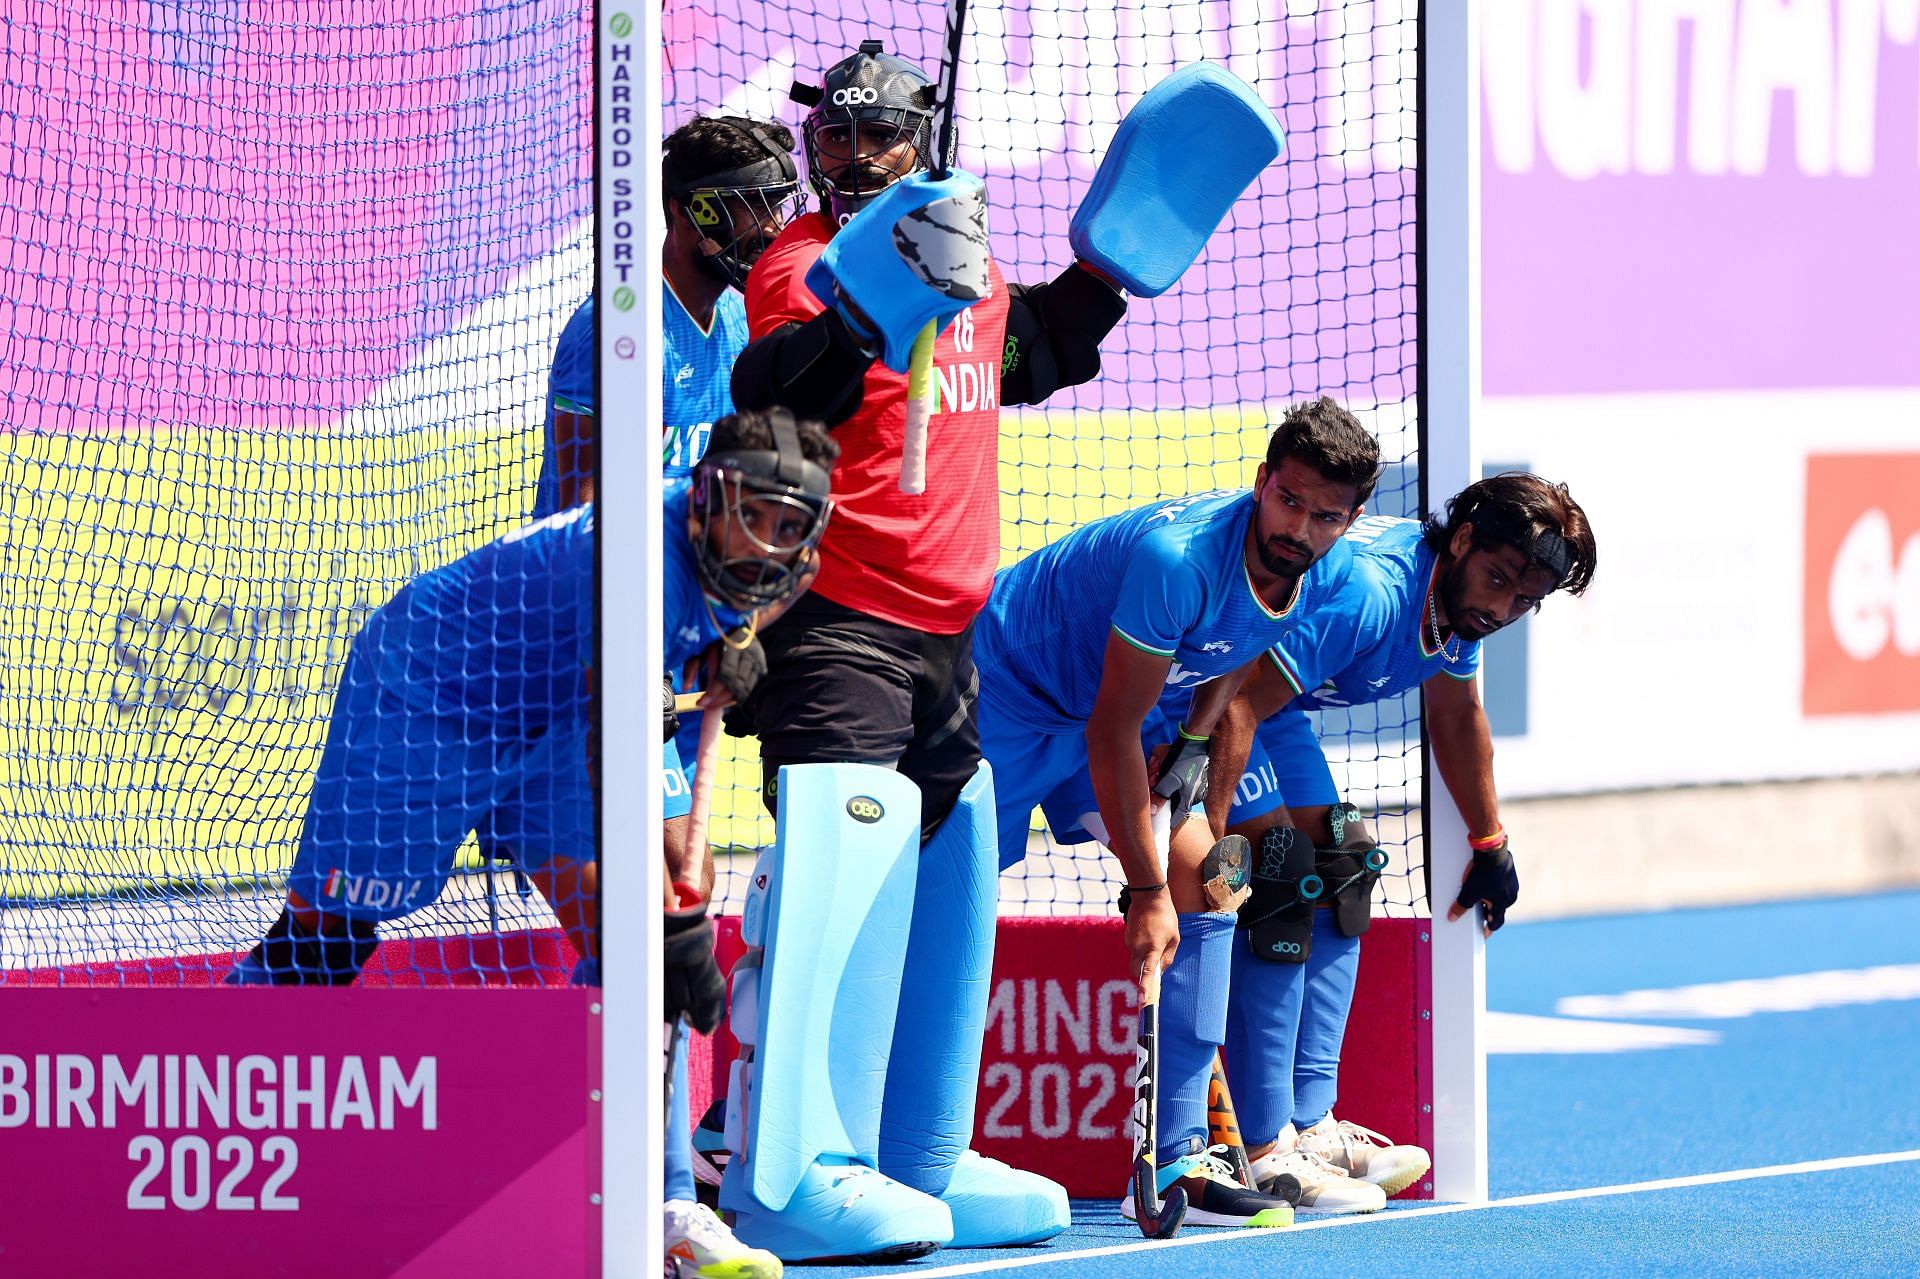 Indian hockey players during a penalty corner against Australia. (PC: Getty Images)